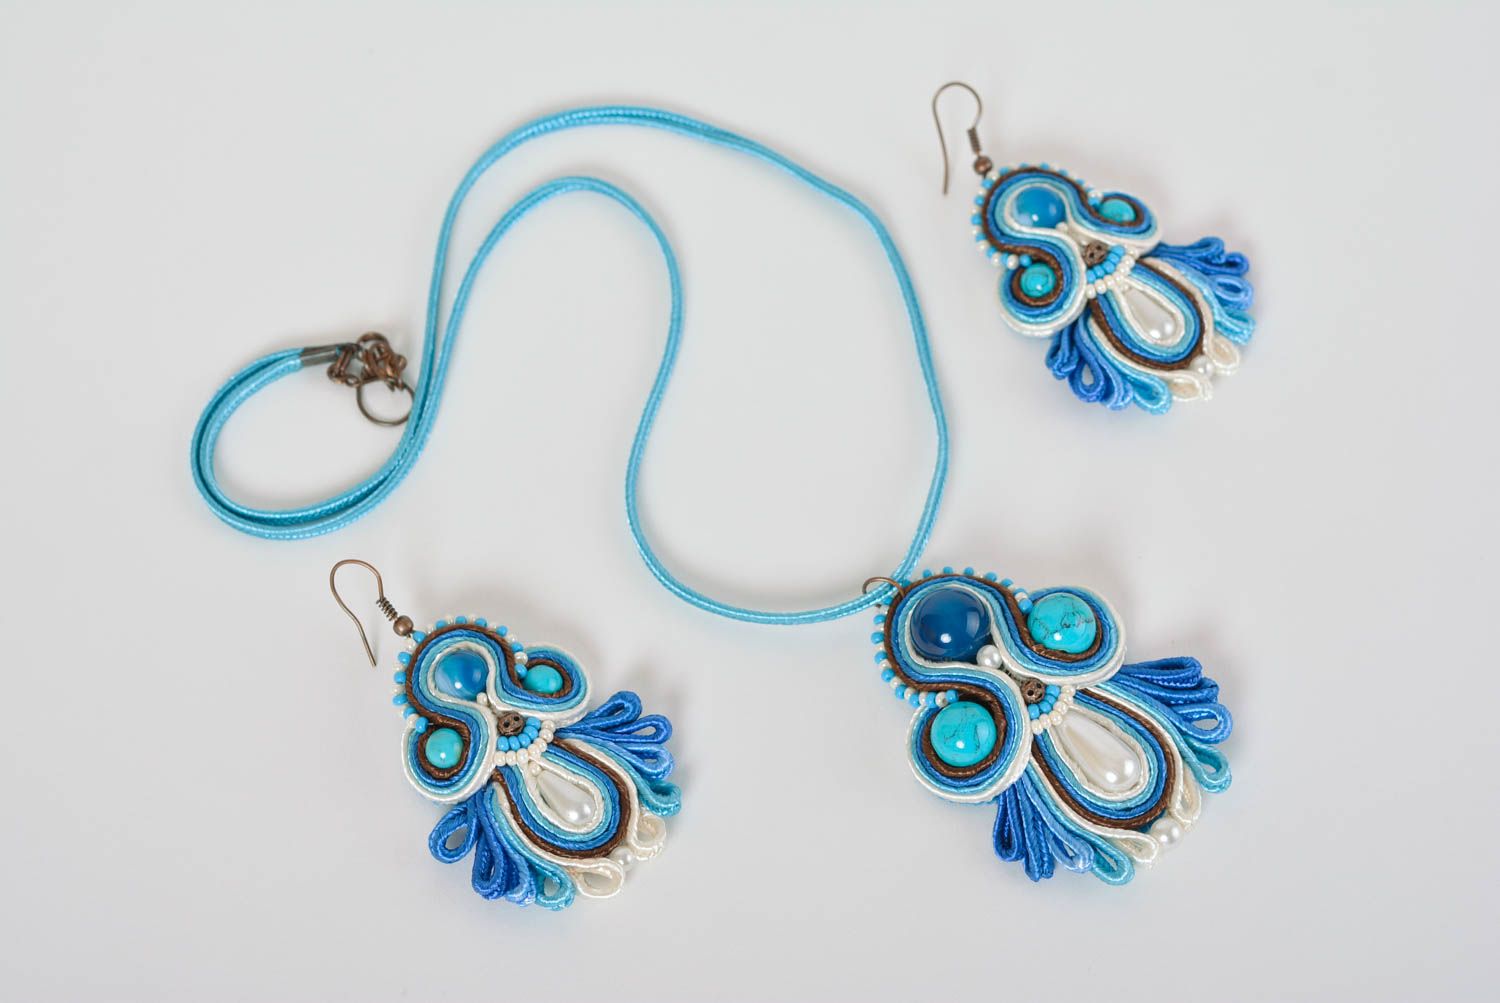 Handmade soutache jewelry soutache pendant and earrings accessories with stones photo 1